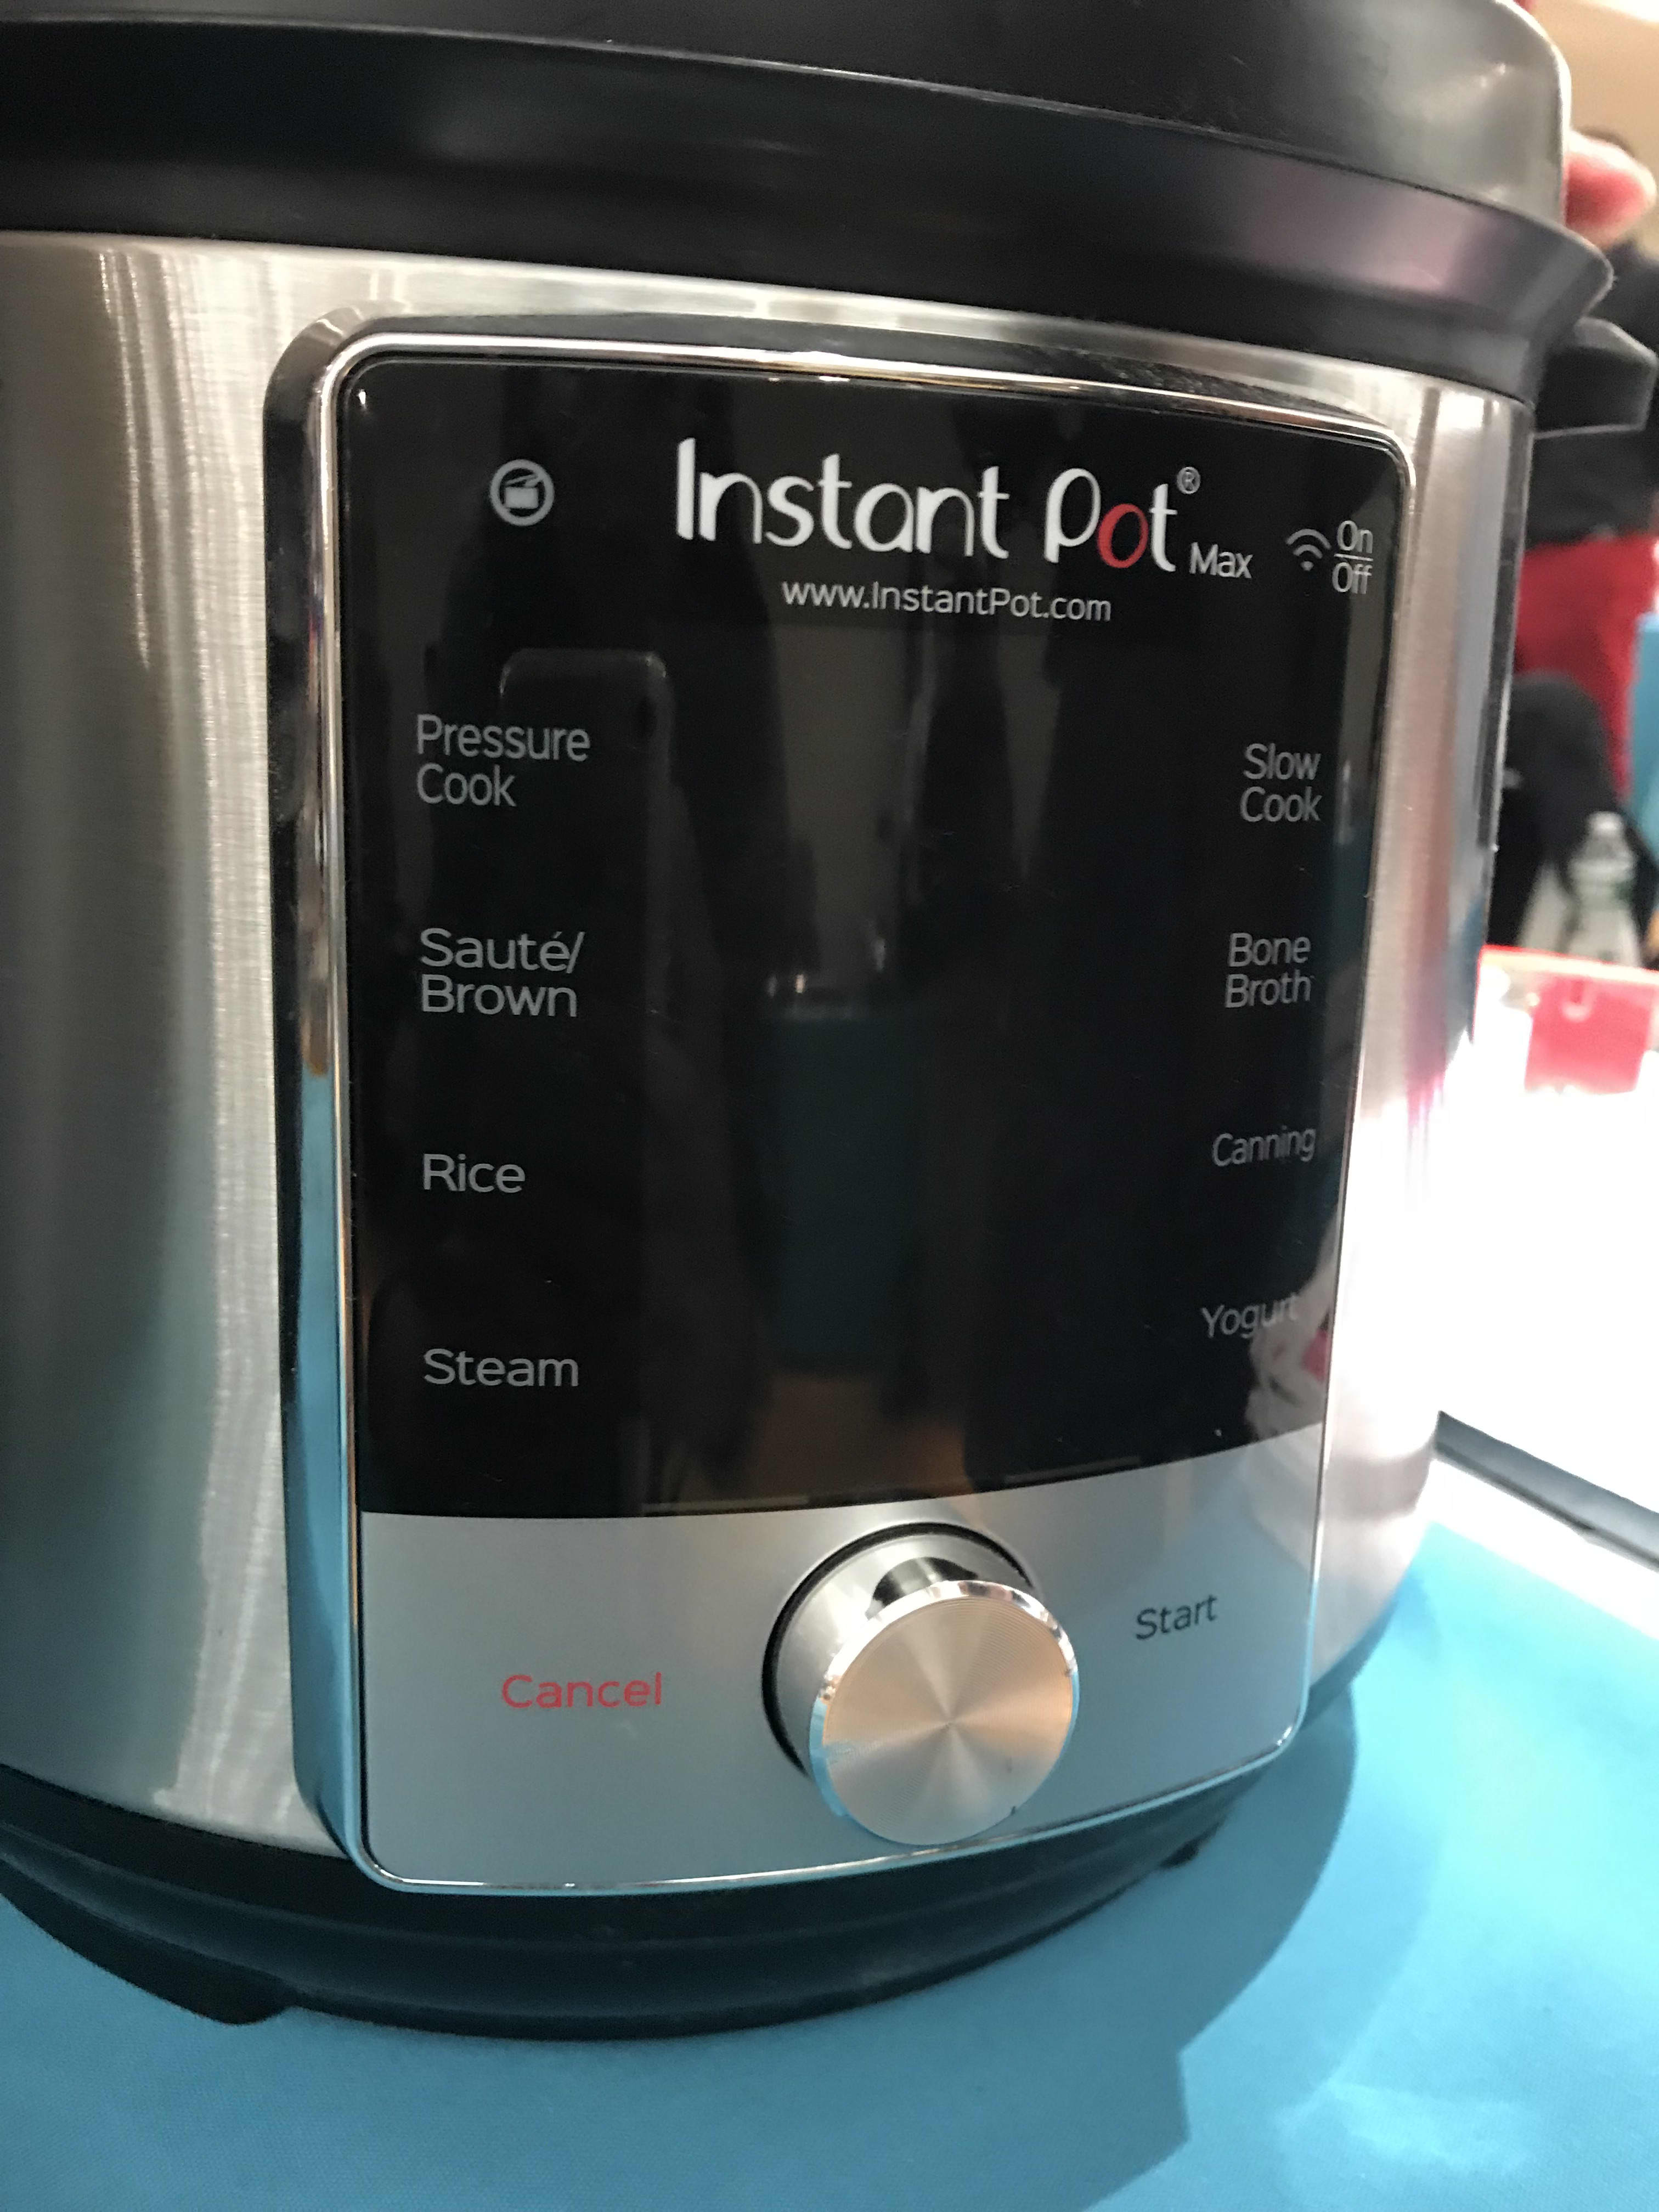 New Instant Pot Max - Where to Buy Instant Pot 2018